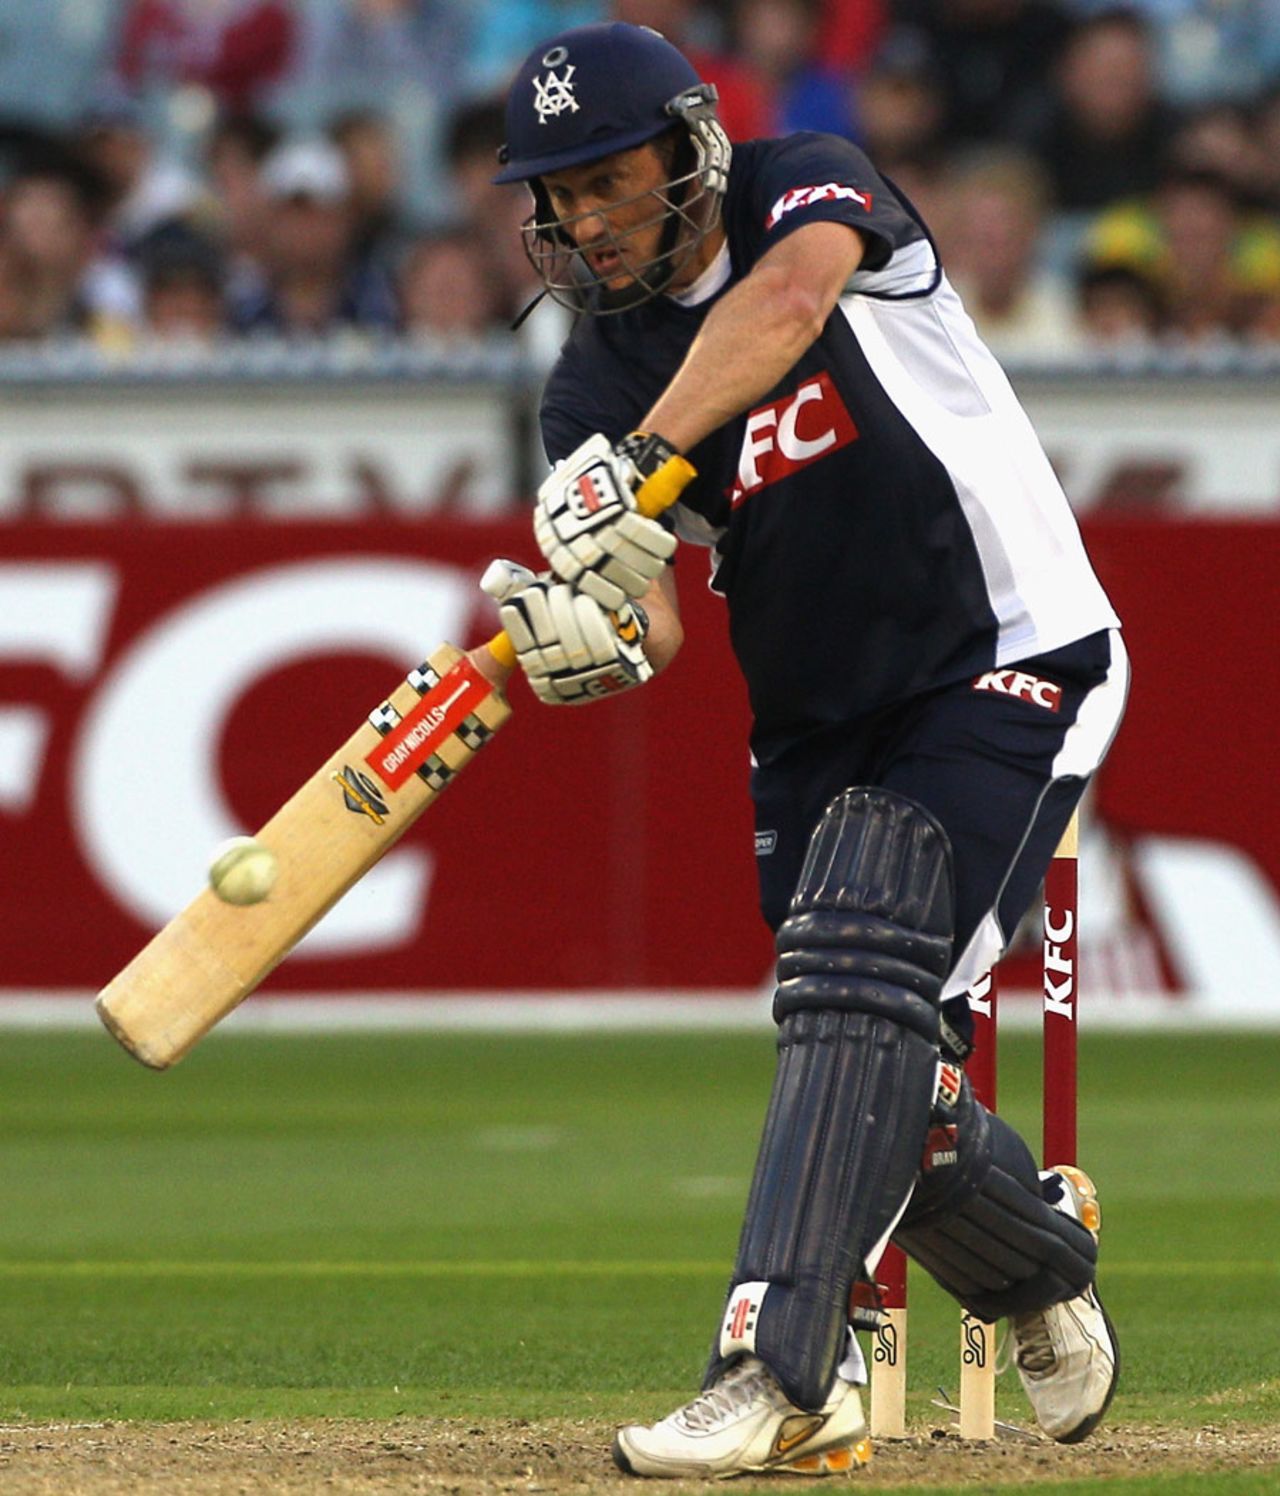 David Hussey provided the momentum in the second half of Victoria's innings, Victoria v Queensland, Big Bash, Melbourne, January 2, 2011 